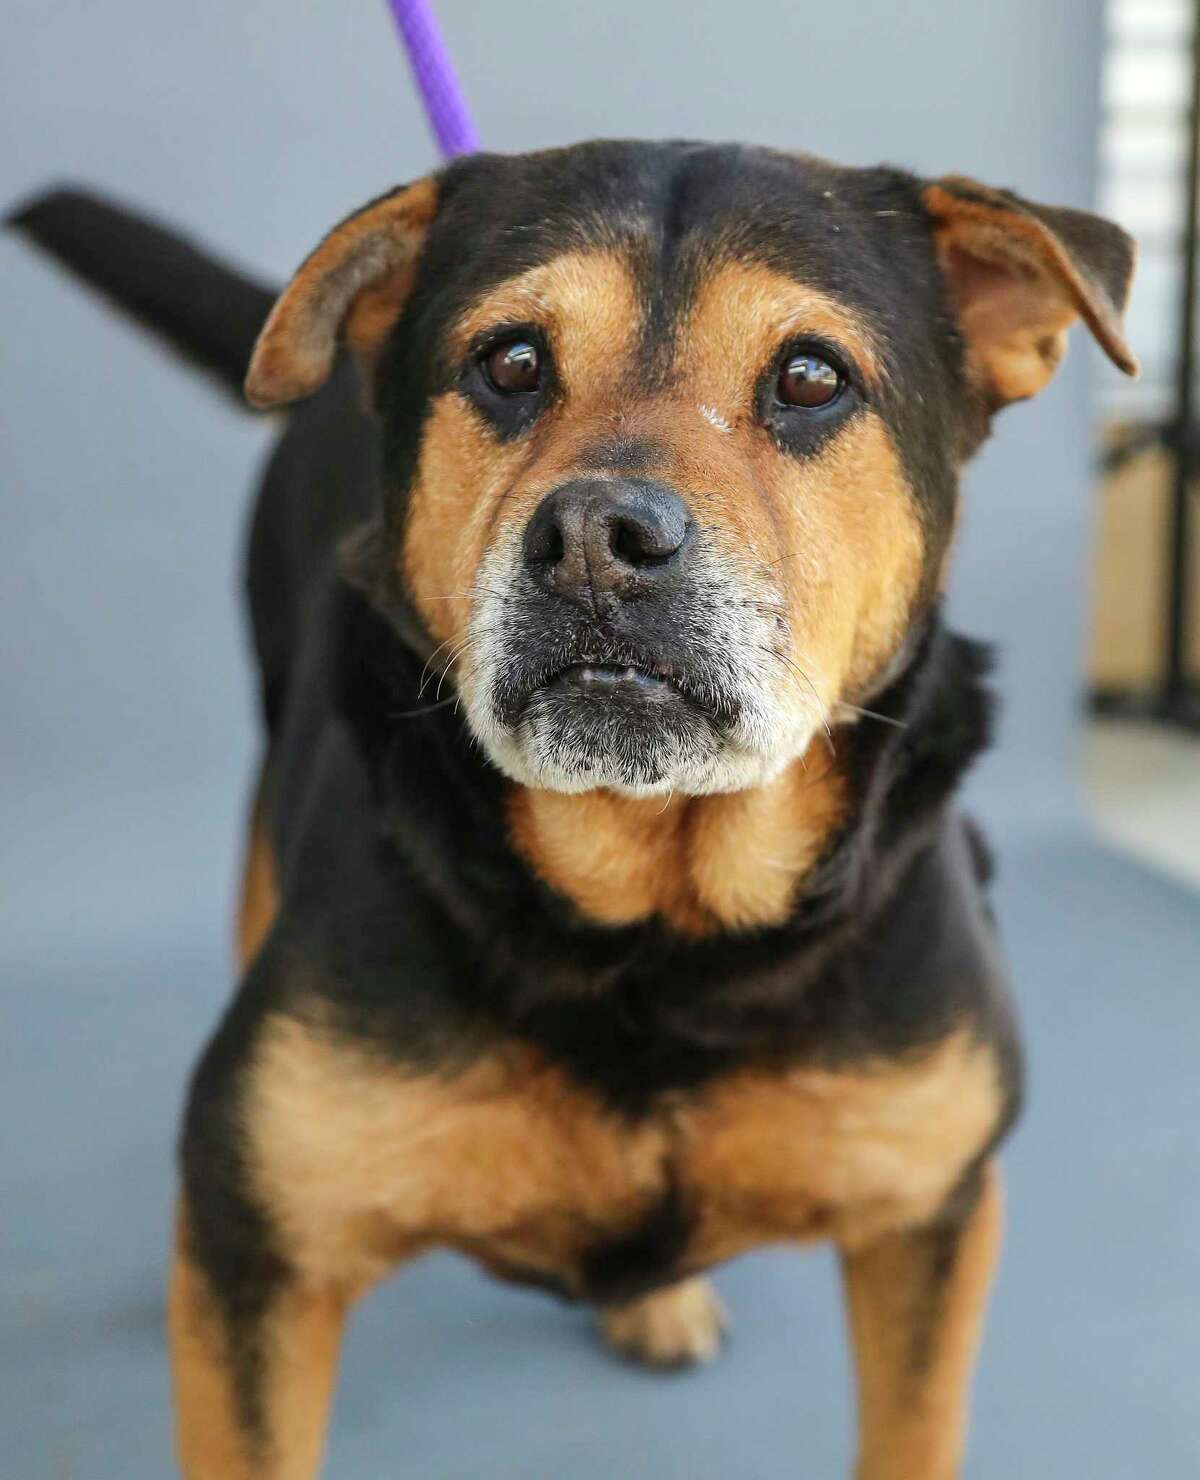 Rex (A449434) is a 7-year-old male, Rottweiler mix available for adoption at Harris County Pets, photographed Wednesday, Jan. 26, 2022, in Houston. 